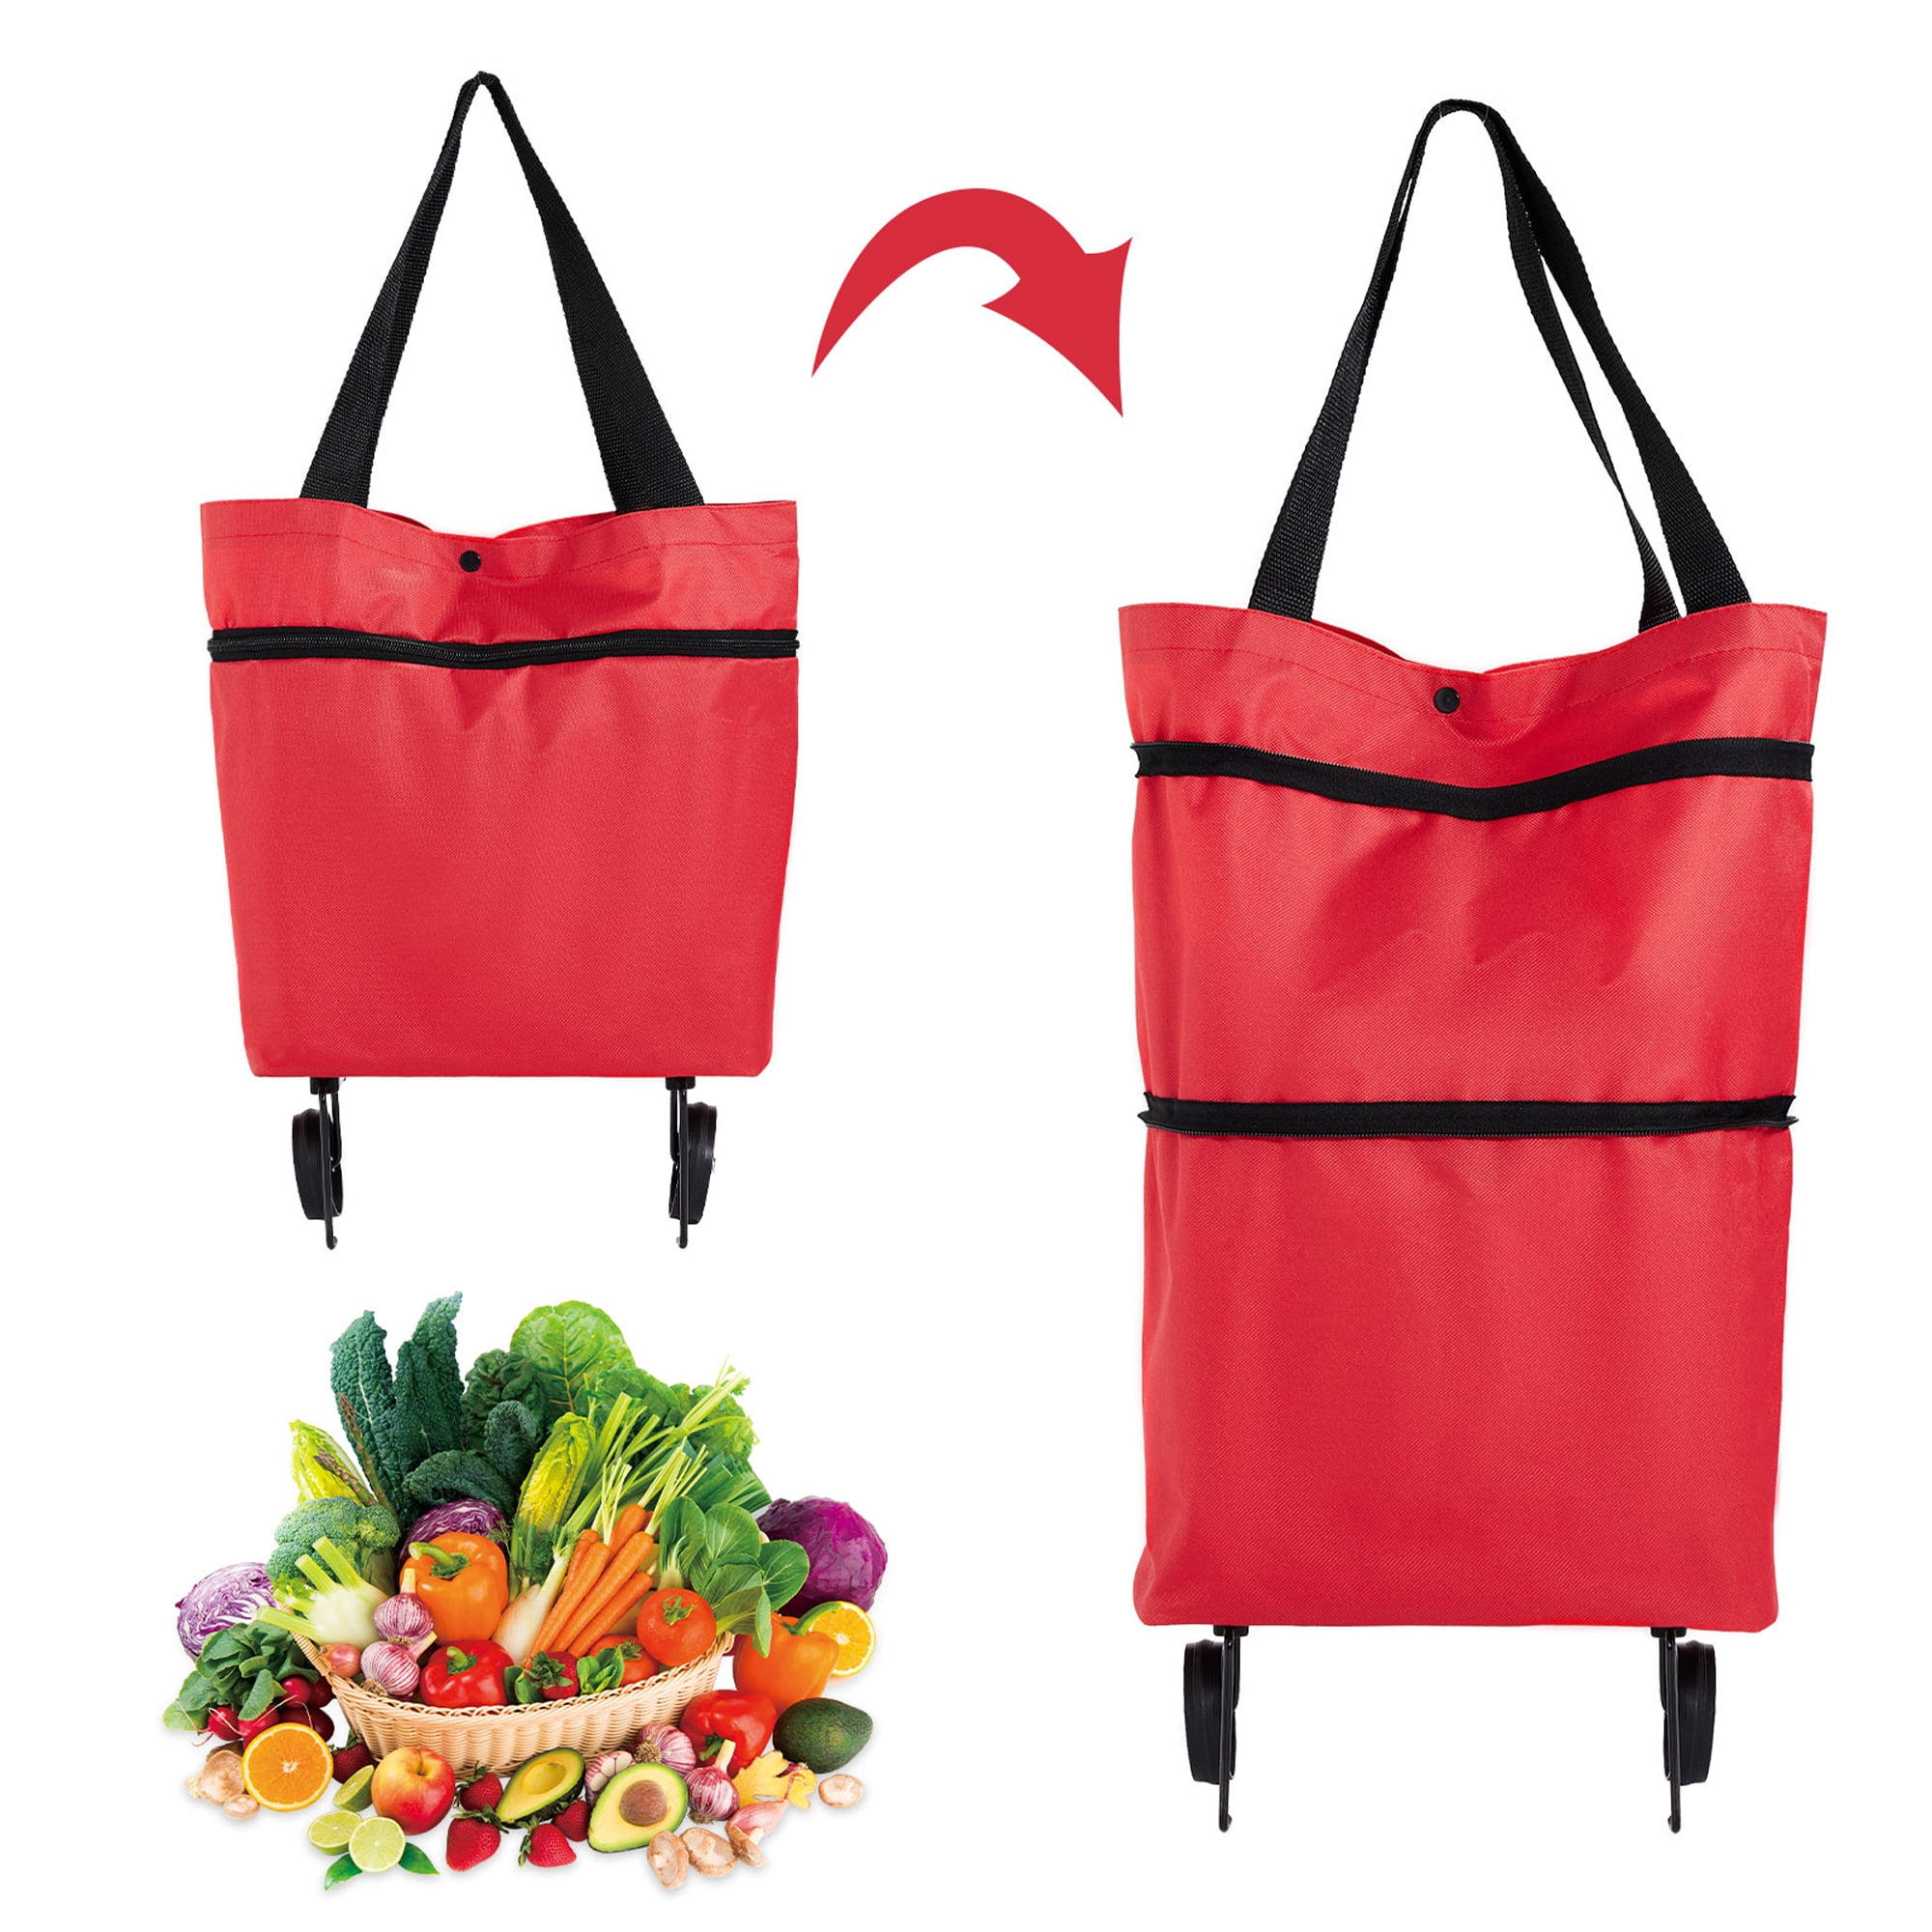 Wholesale Foldable Collapsible Shopping Trolley Trolley Bag With Wheels  Reusable Grocery Organizer And Vegetable Bag From Wai10, $26.42 | DHgate.Com